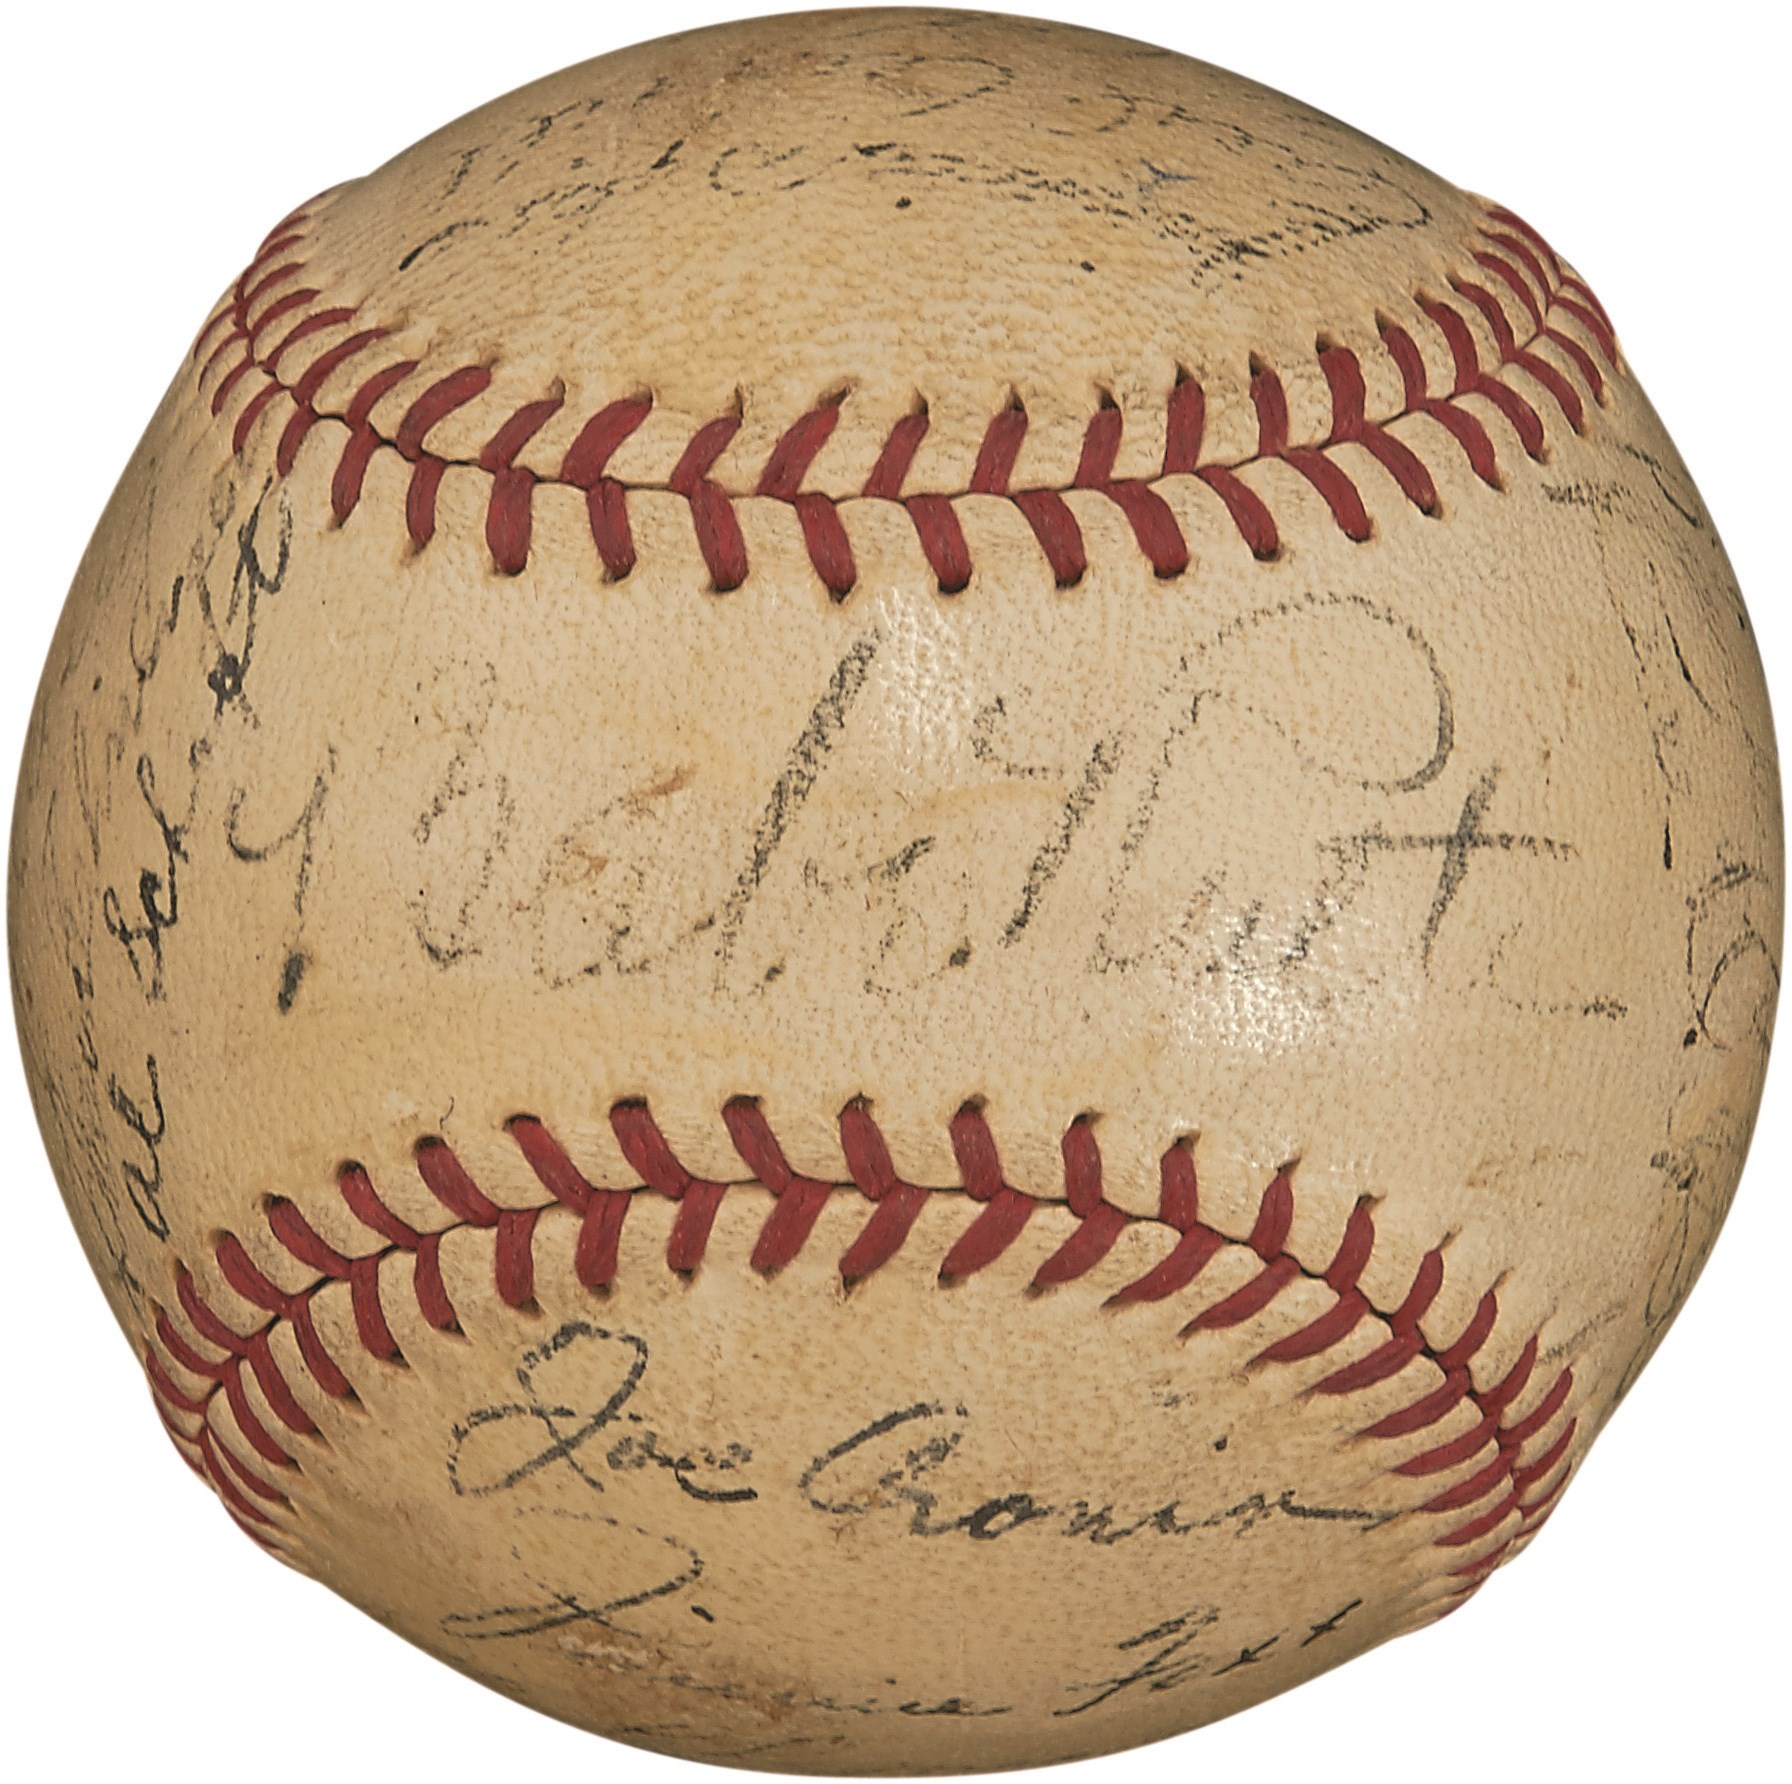 - 1934 American League All-Star Team-Signed Baseball with Ruth and Gehrig (PSA)